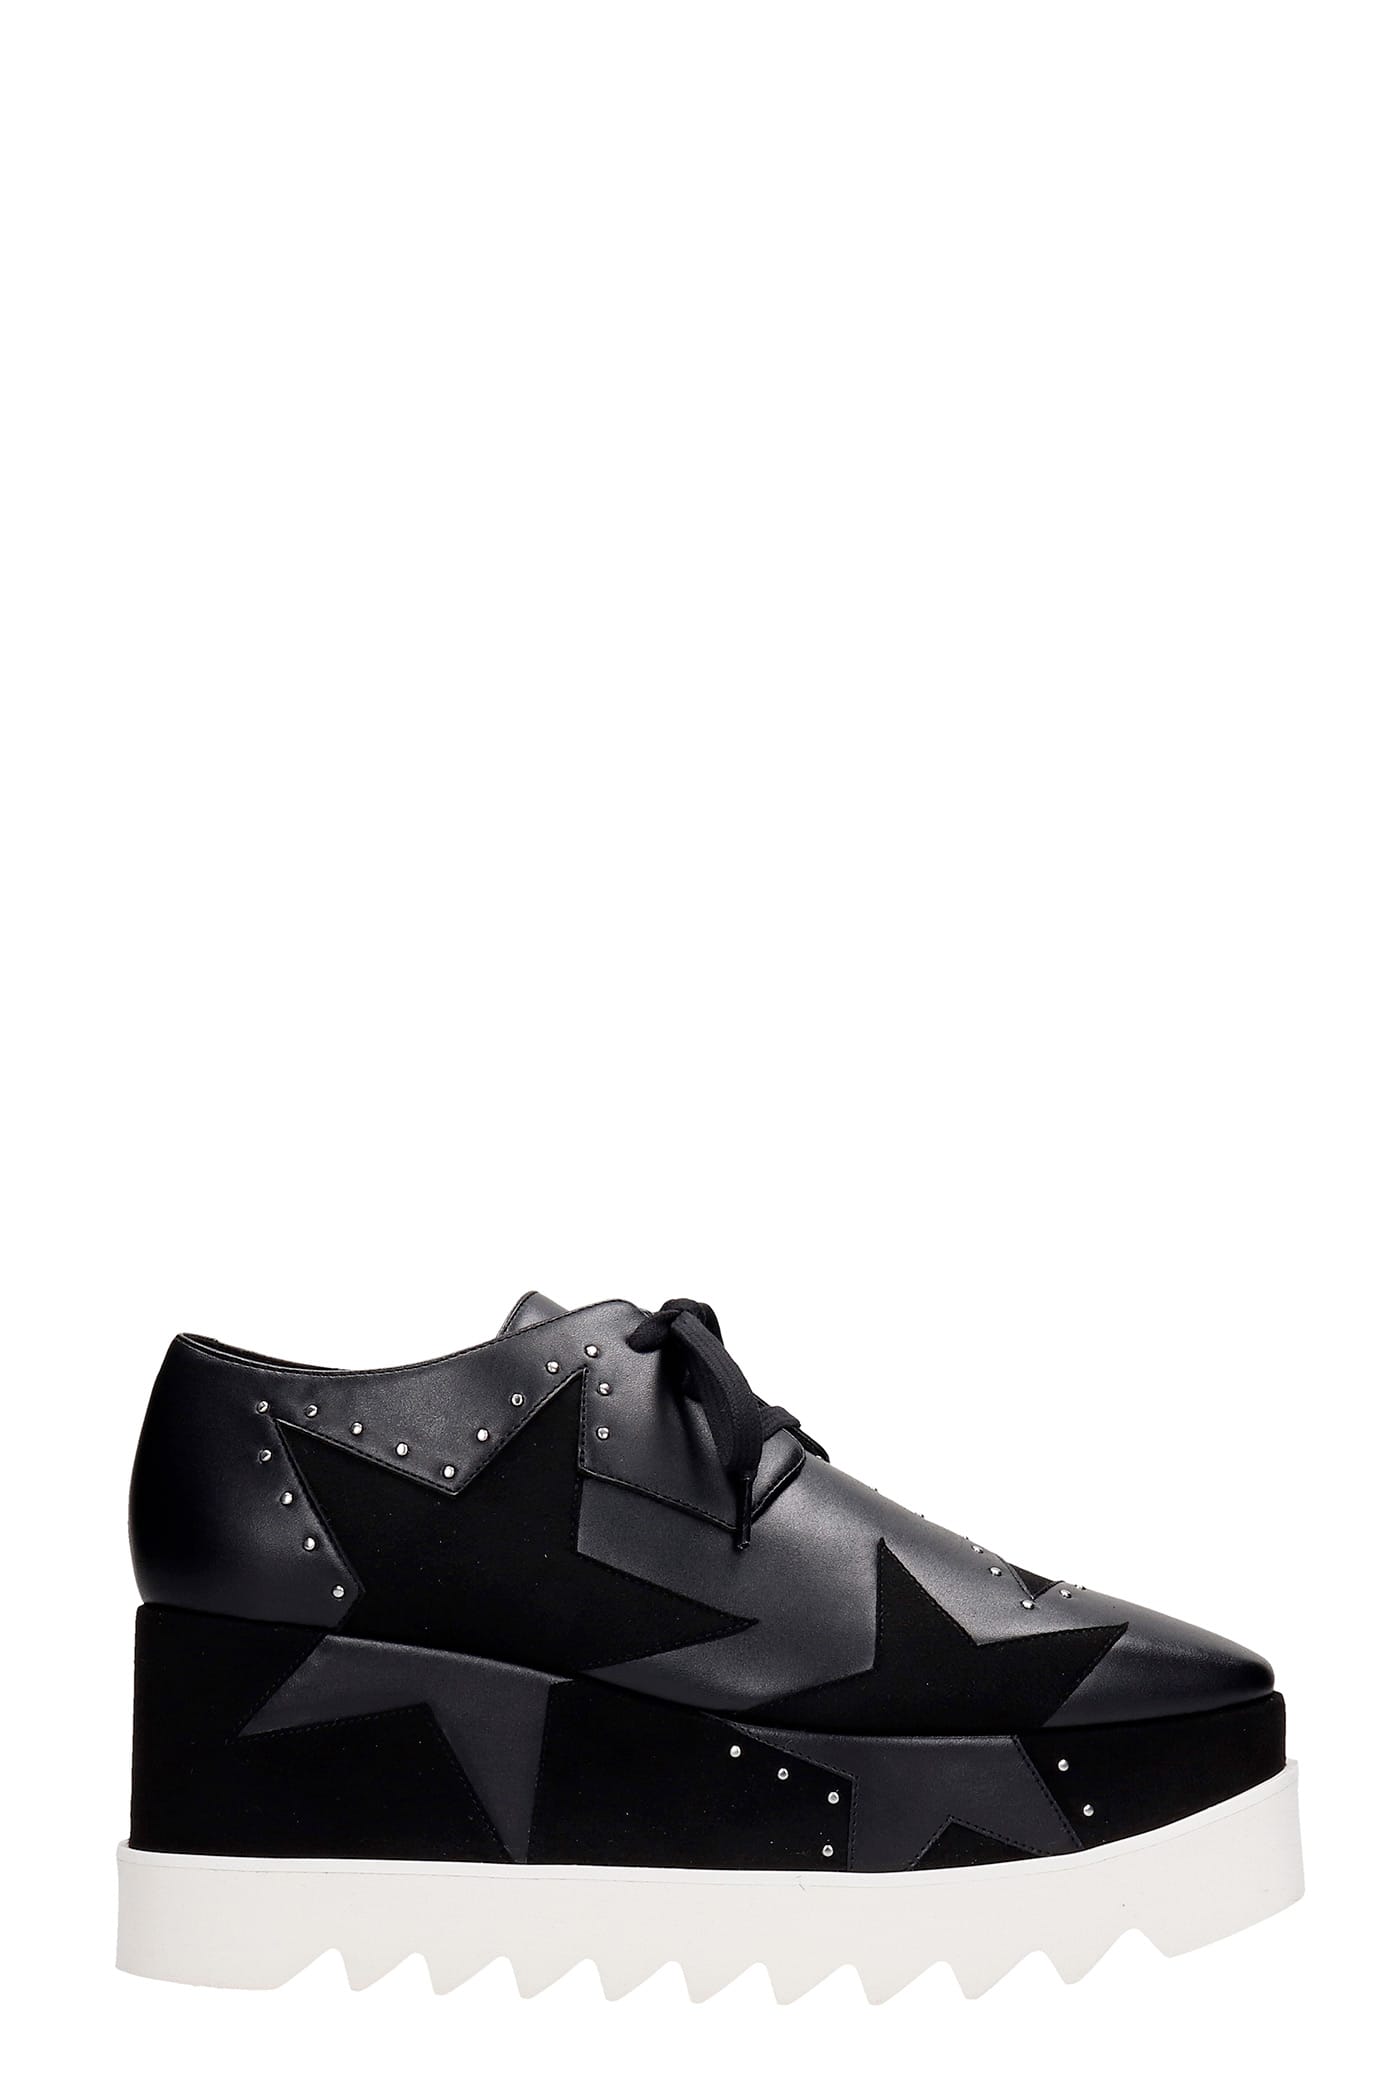 Stella McCartney Lace Up Shoes In Black Faux Leather